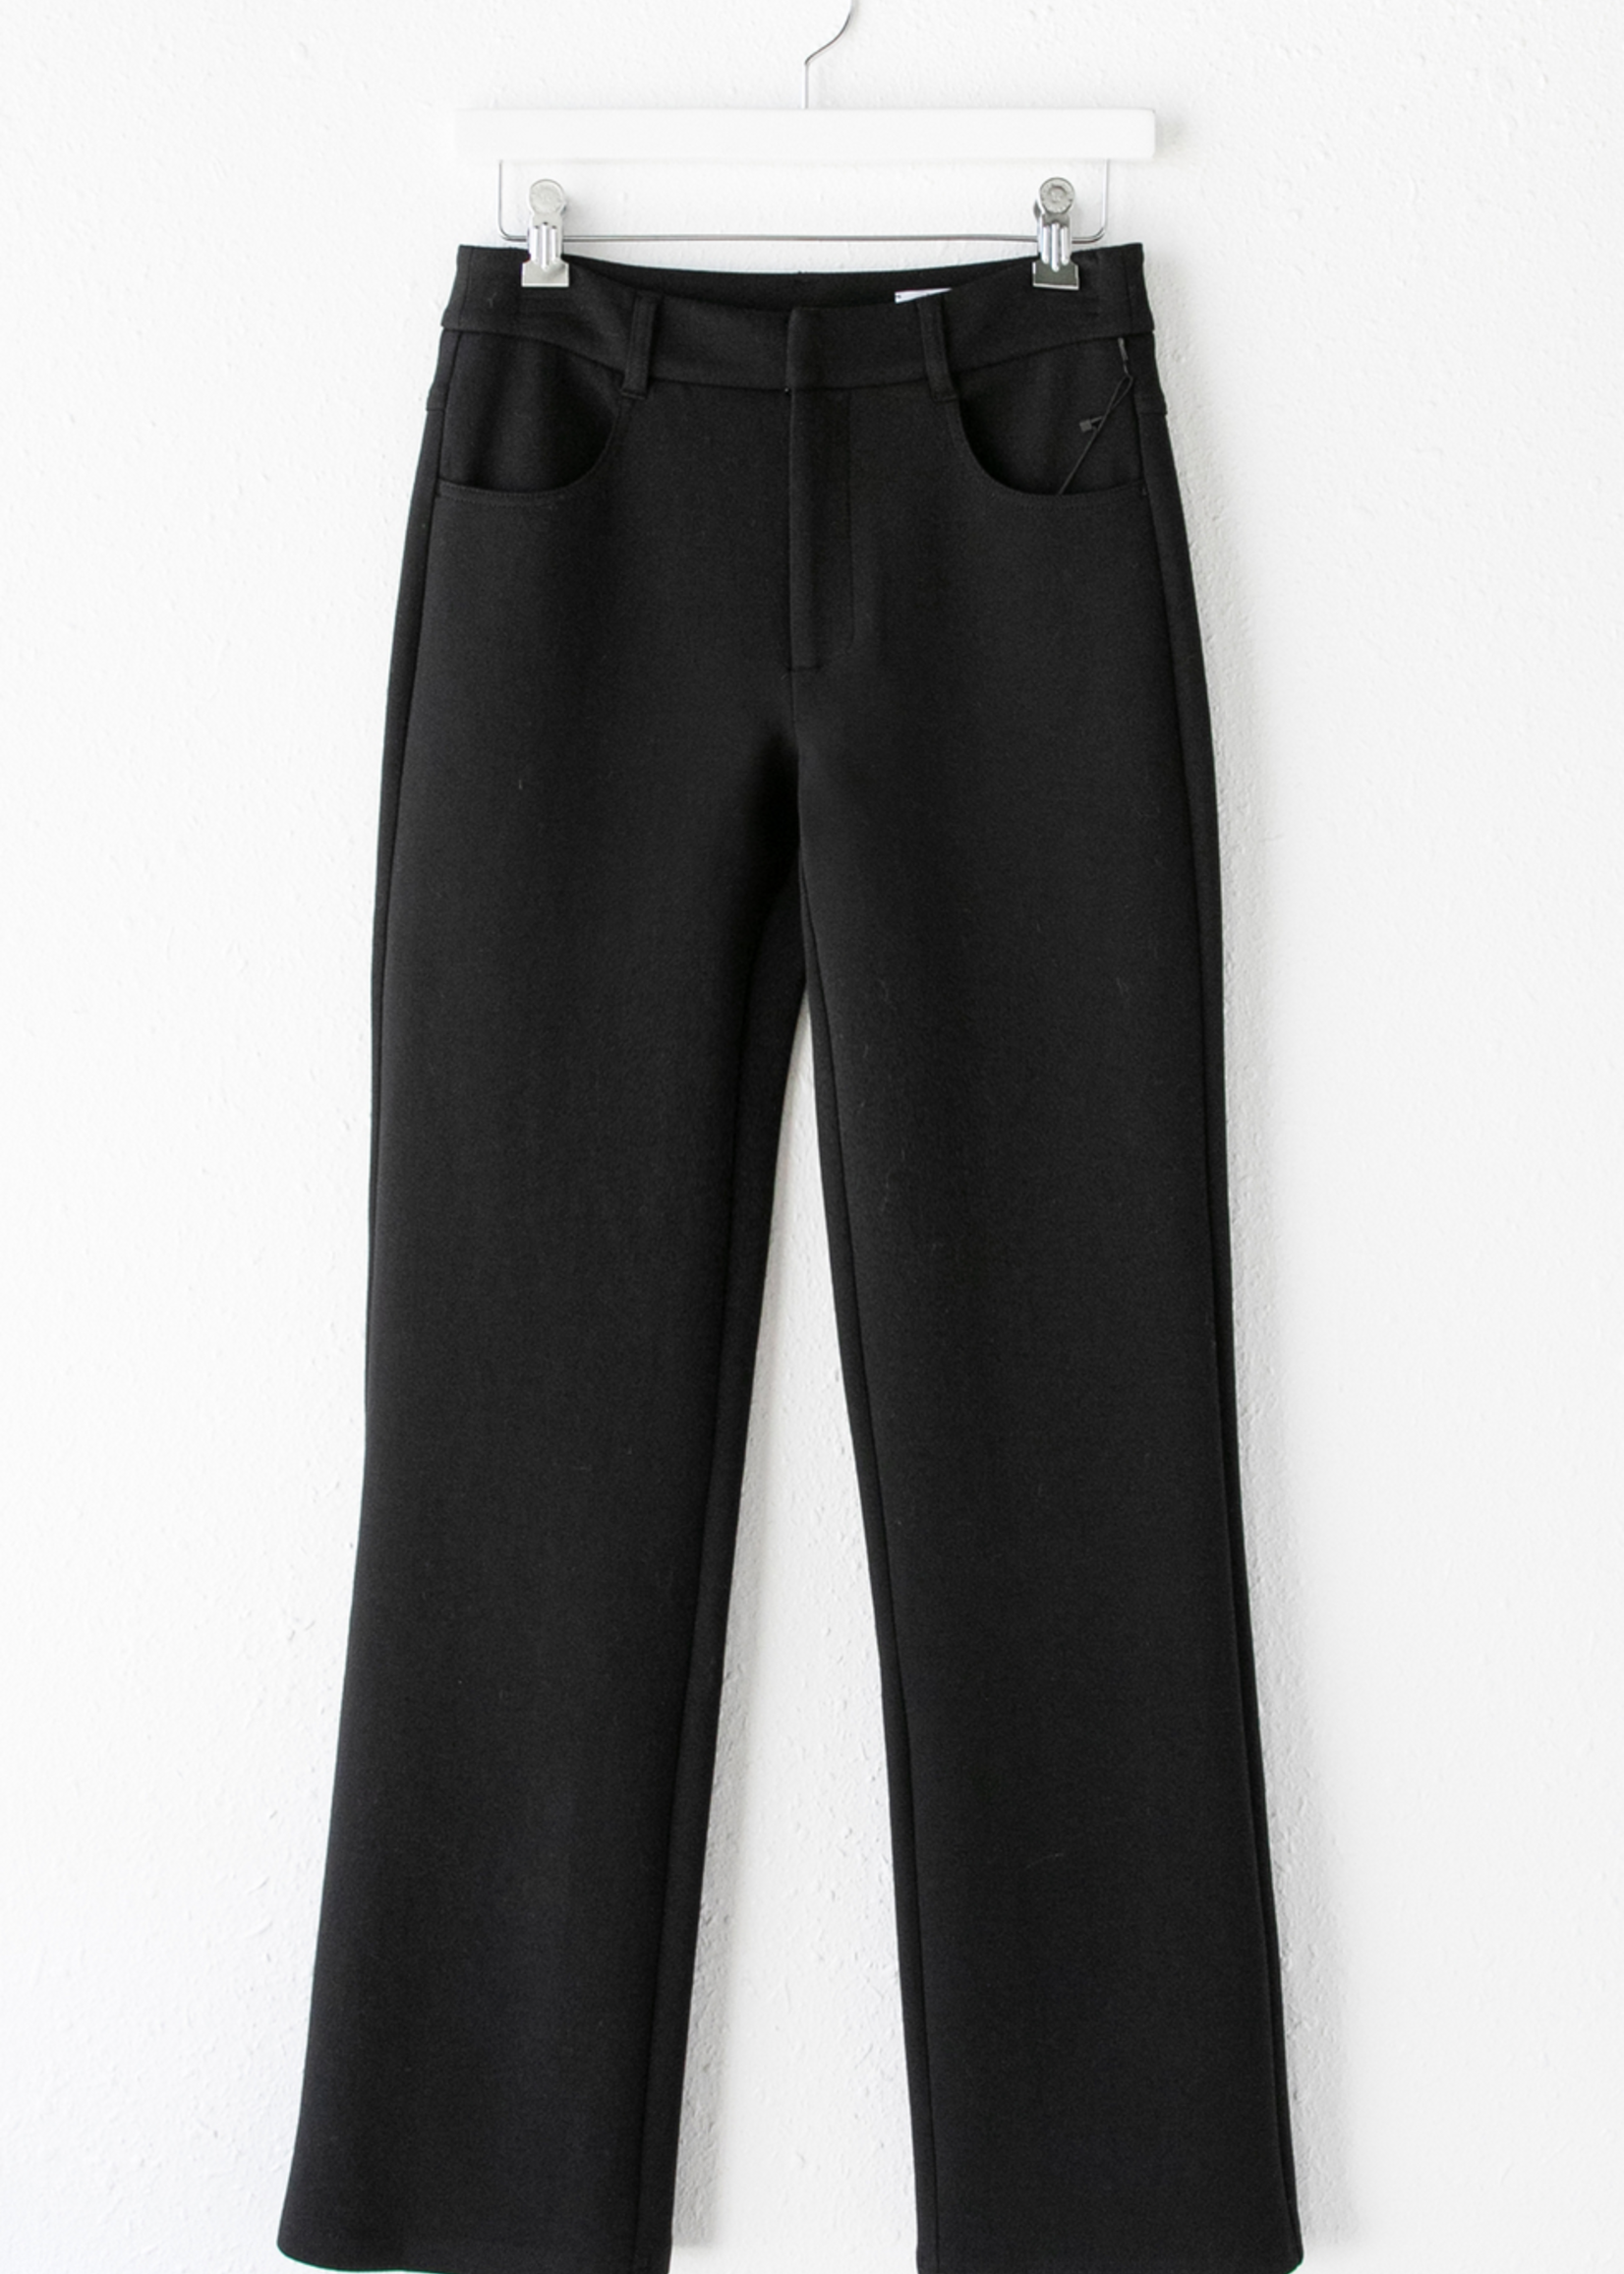 PHILLY PONTI TROUSERS